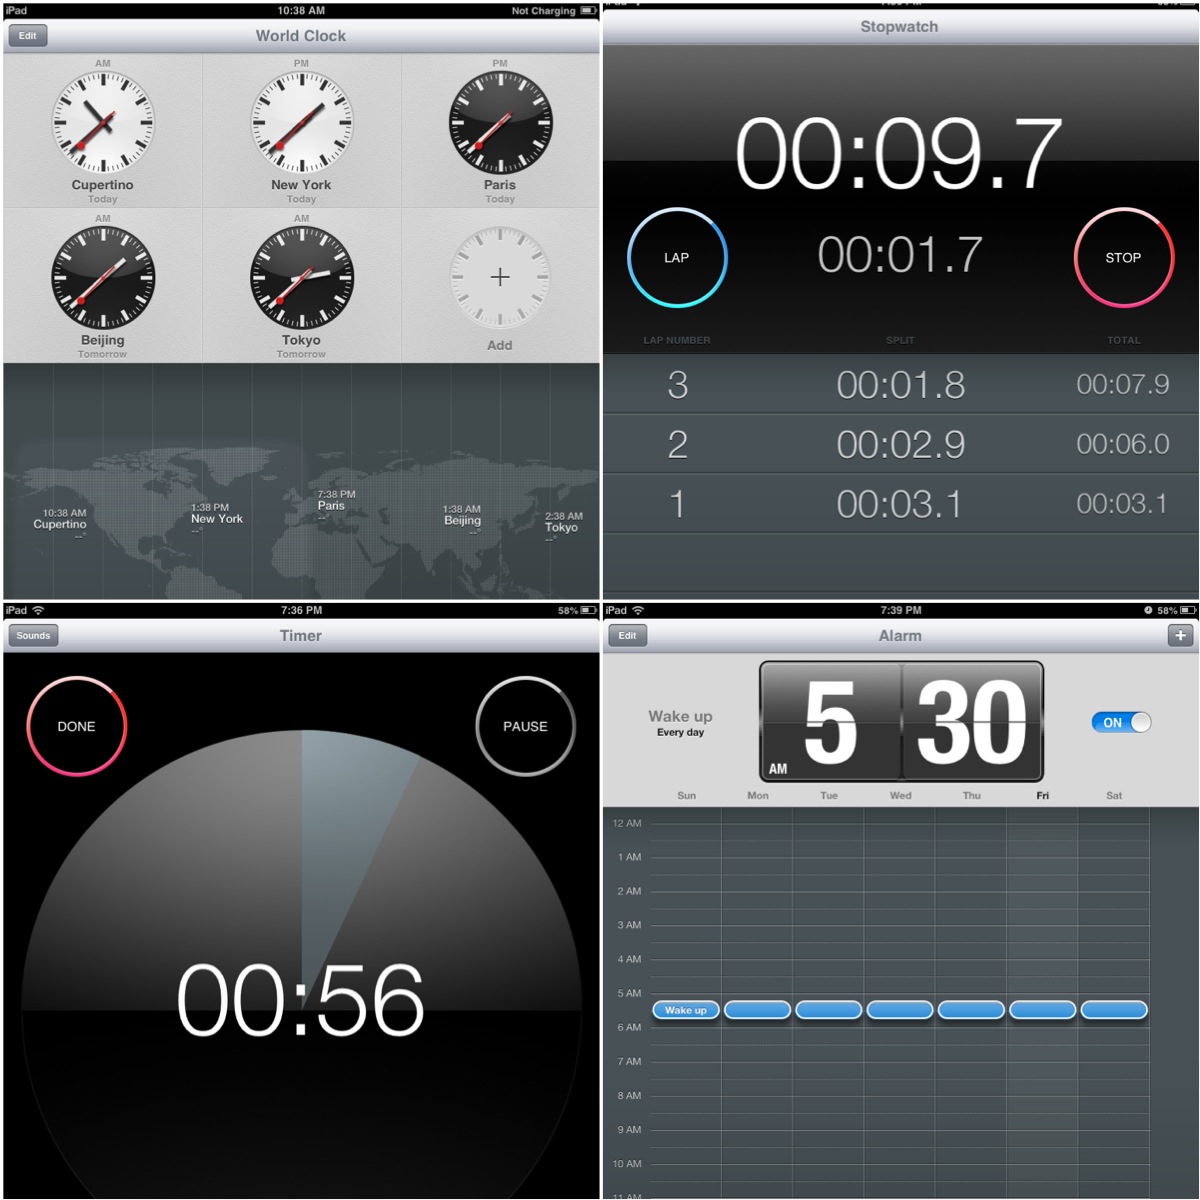 Hands on with iOS 6 Software Update on iPad 2 Clock App